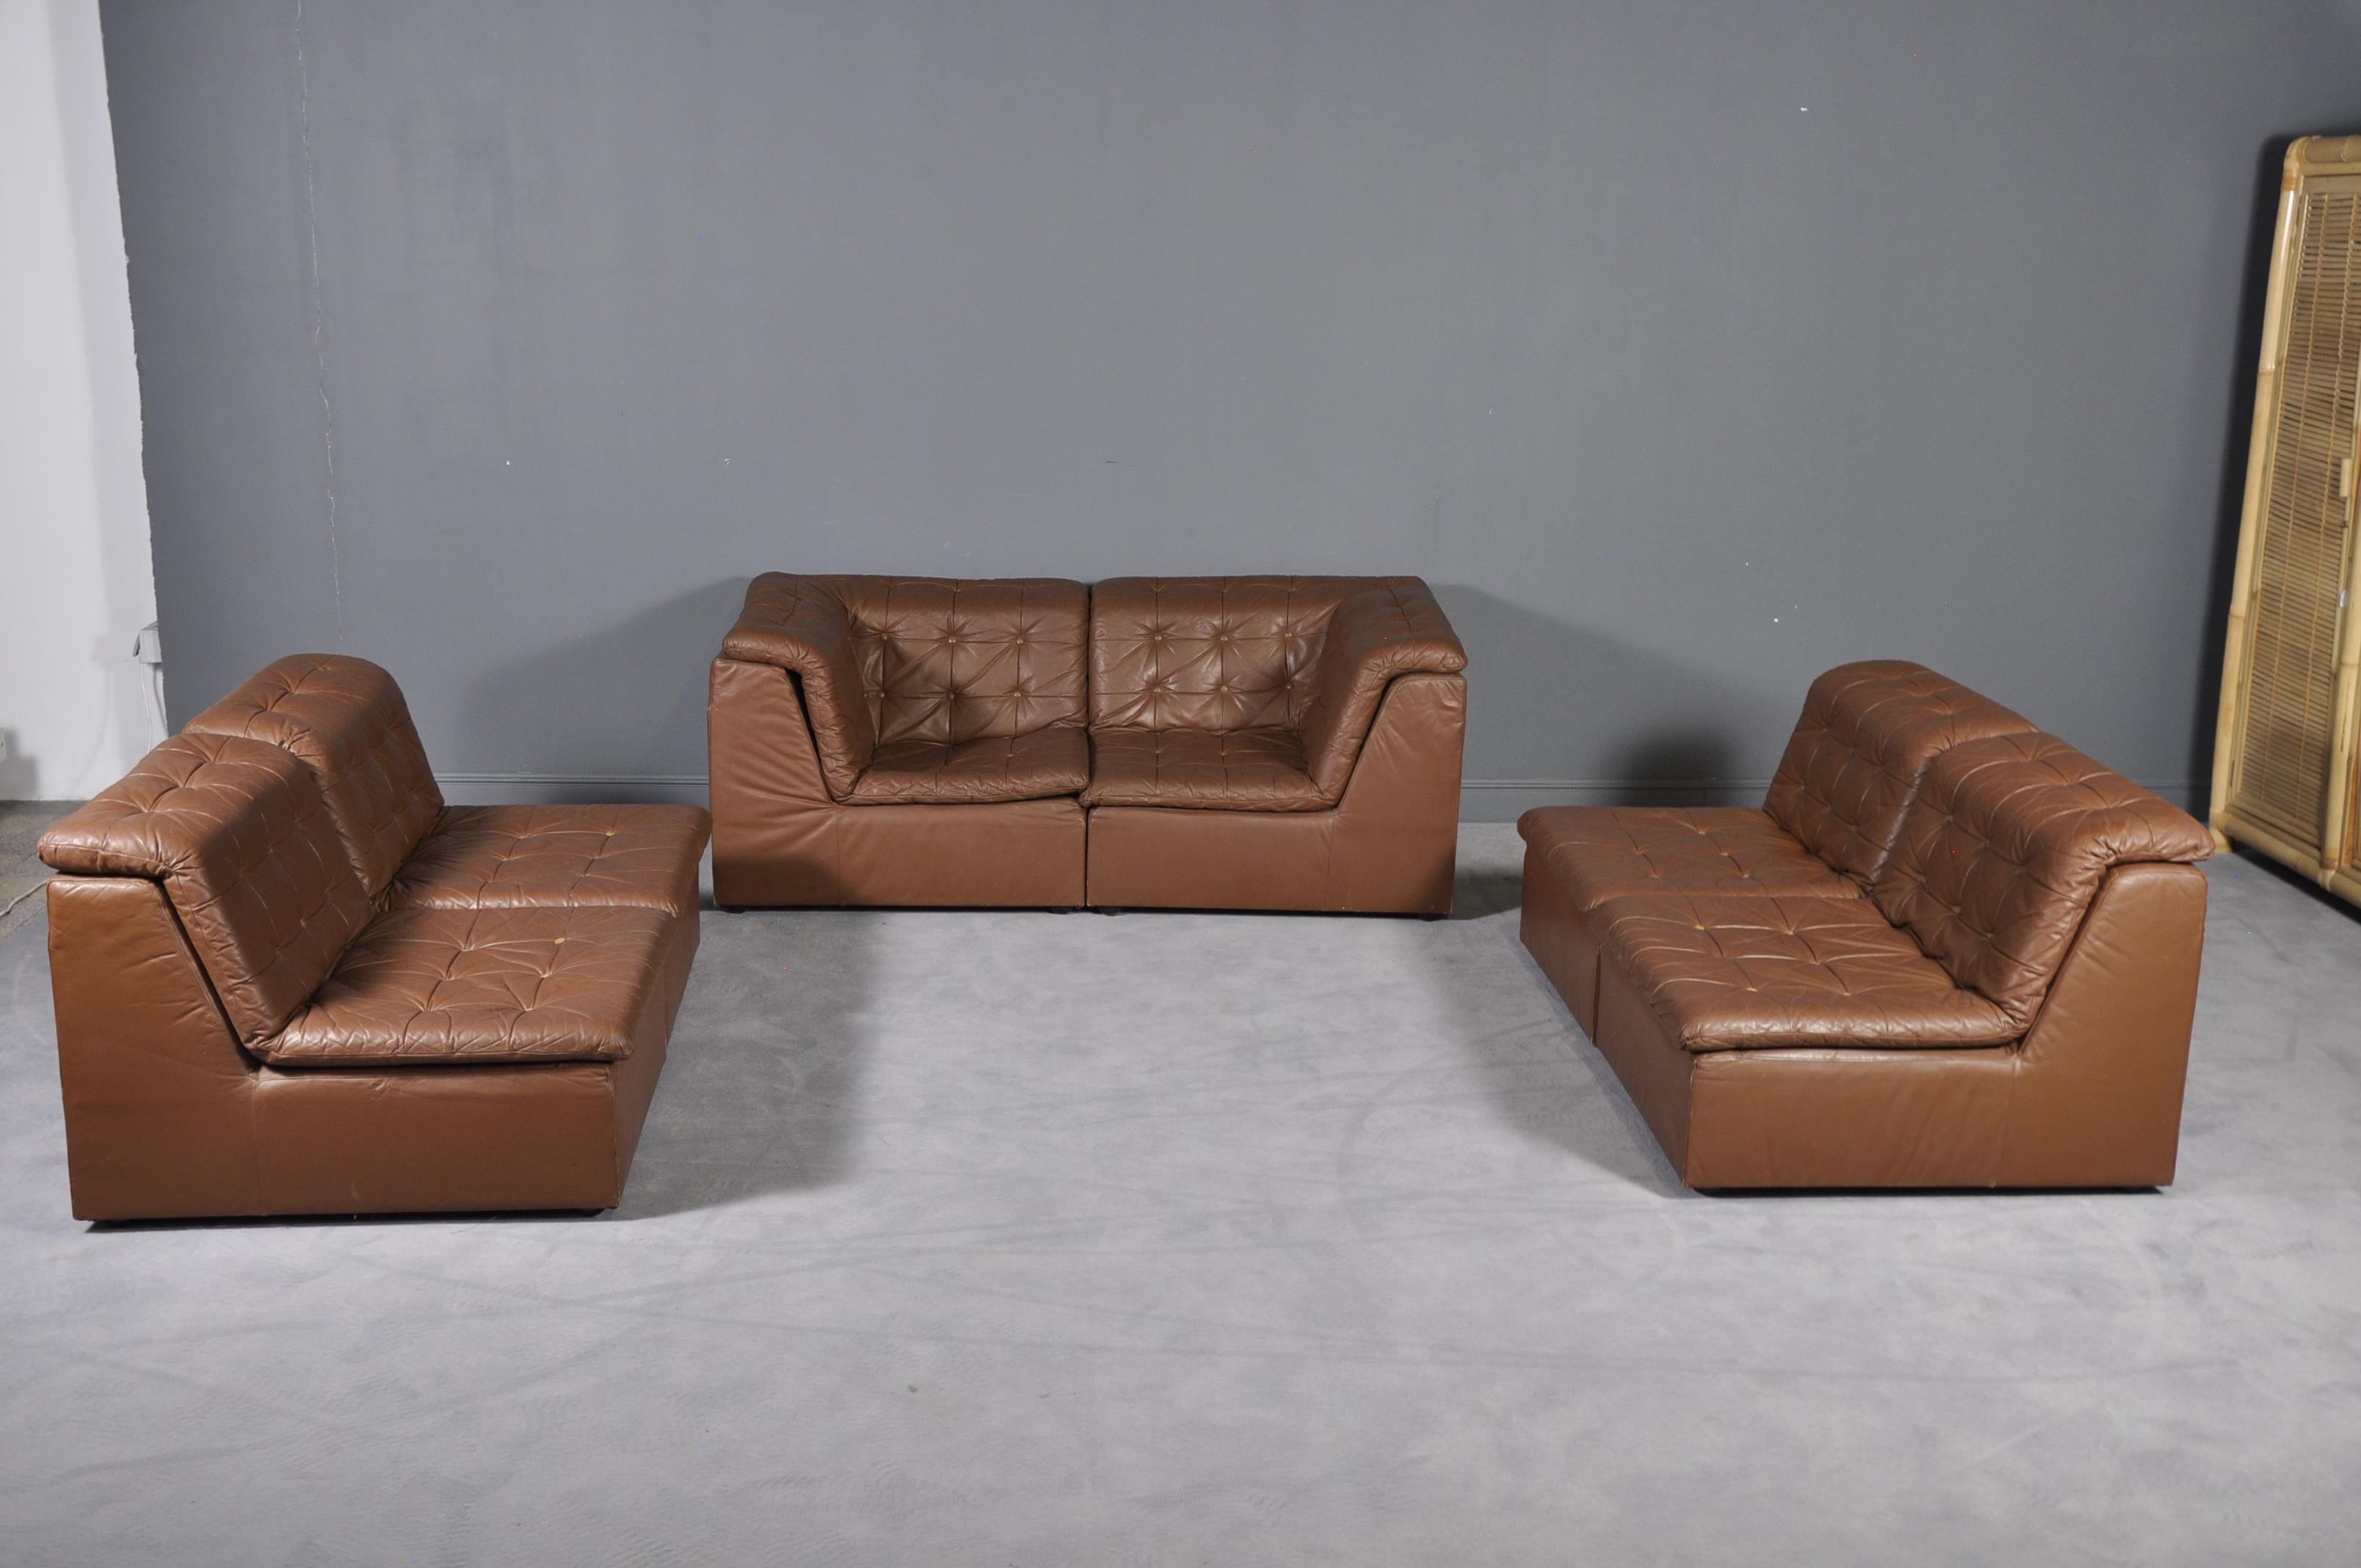 Cognac Leather “De Sede Style” Patchwork Modular Sofa from Laauser, Germany 1970 For Sale 3